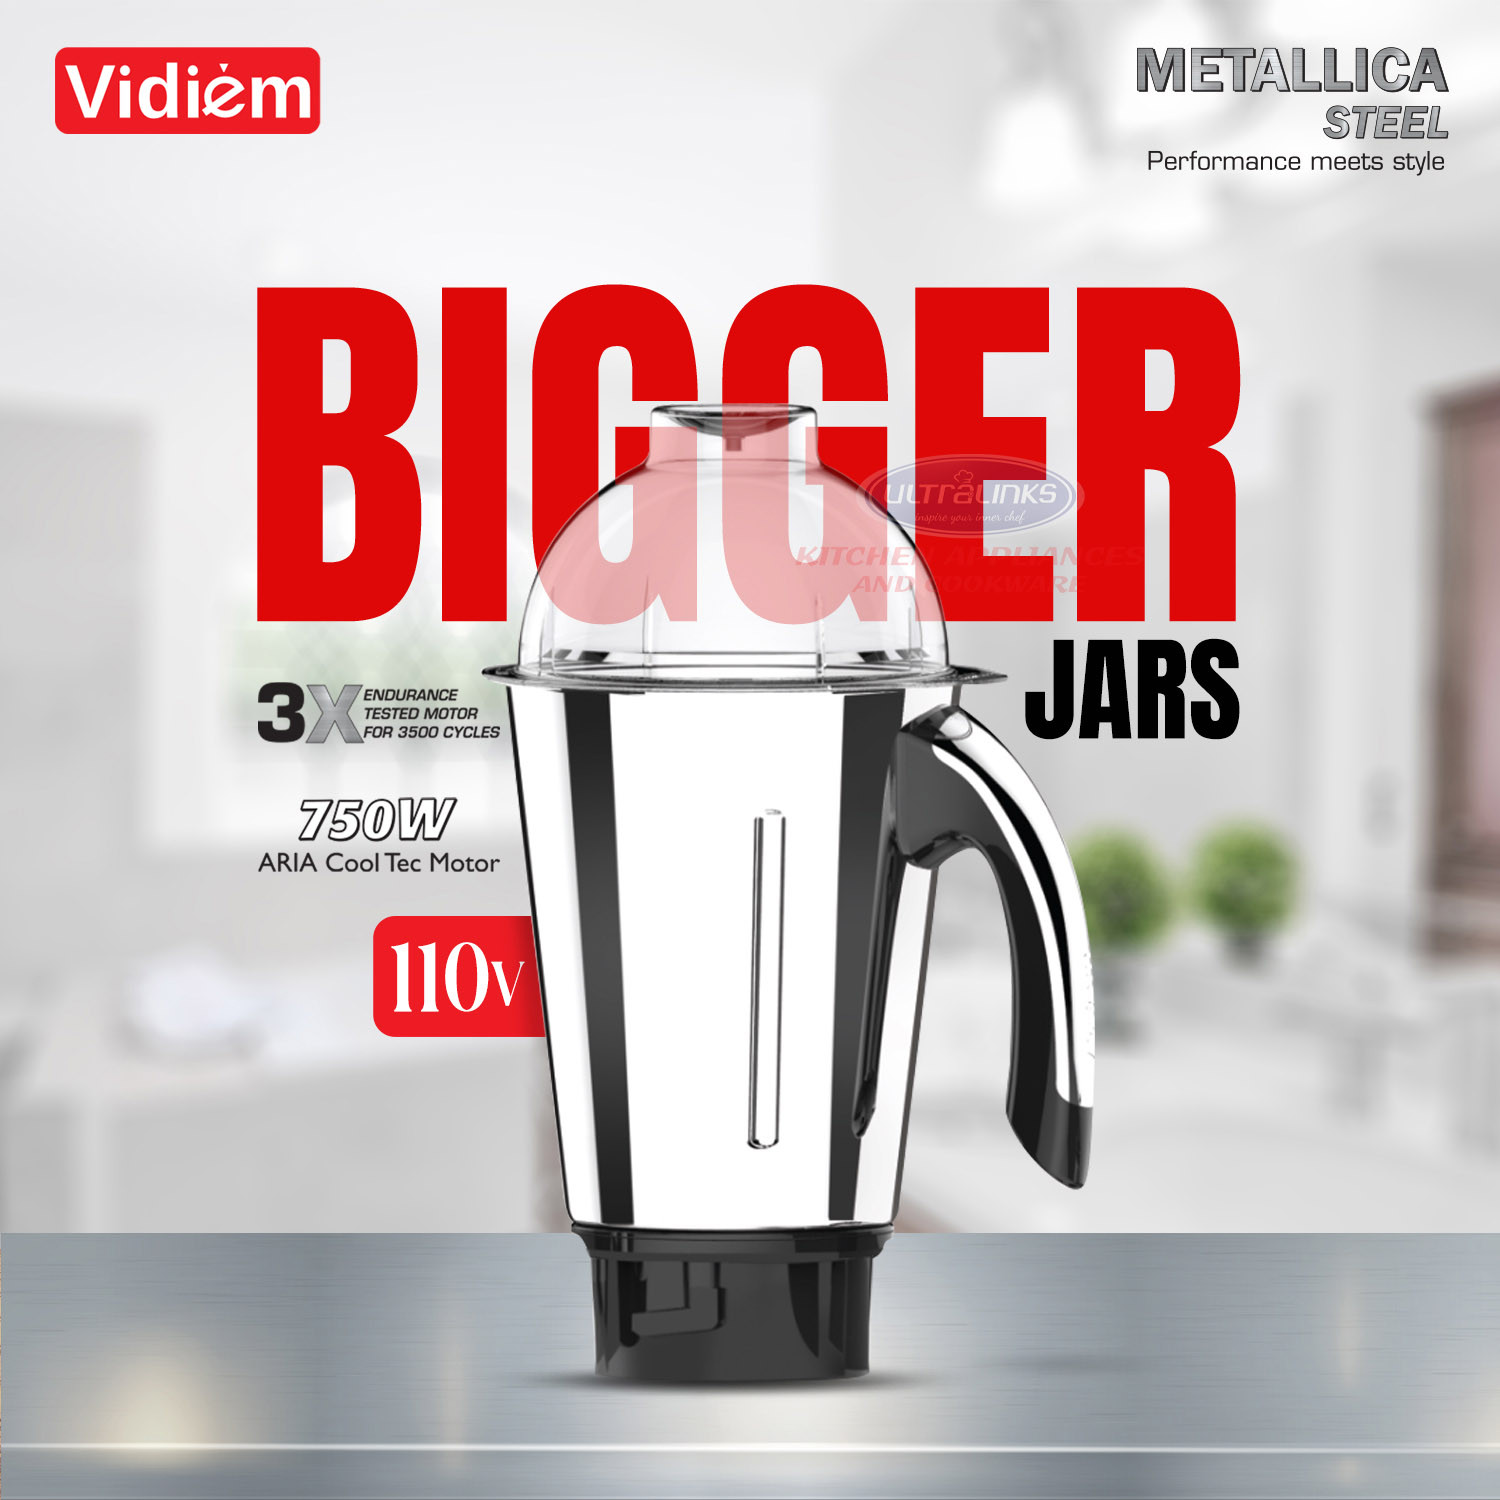 vidiem-metallica-steele-650w-110v-stainless-steel-jars-indian-mixer-grinder-with-spice-coffee-grinder-jar-for-use-in-canada-usa6